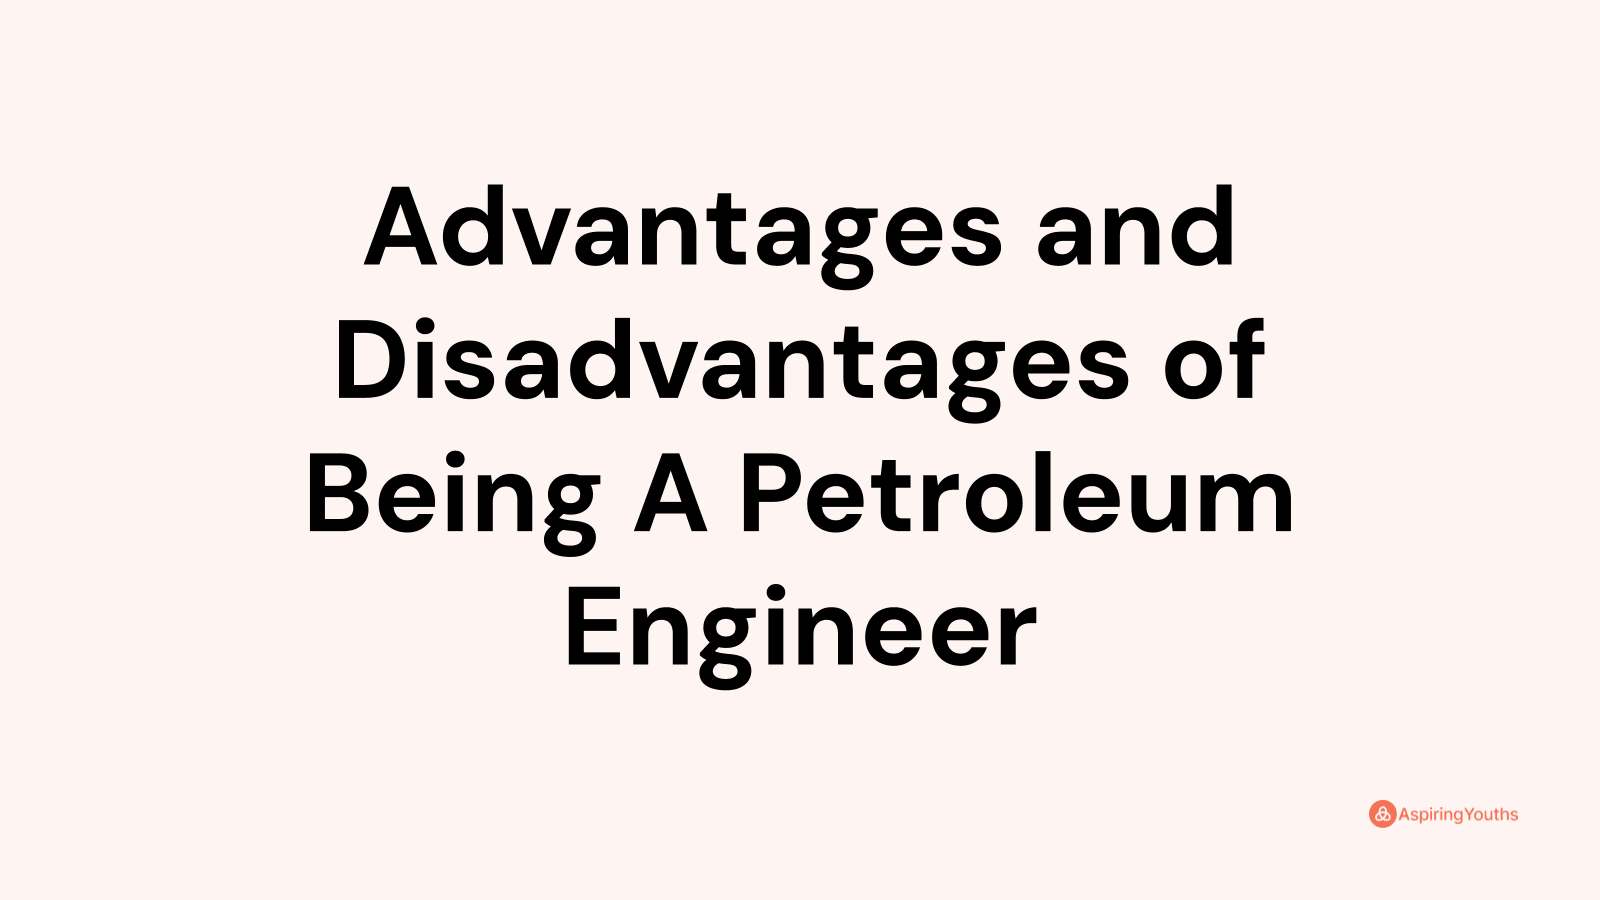 Advantages and disadvantages of Being A Petroleum Engineer